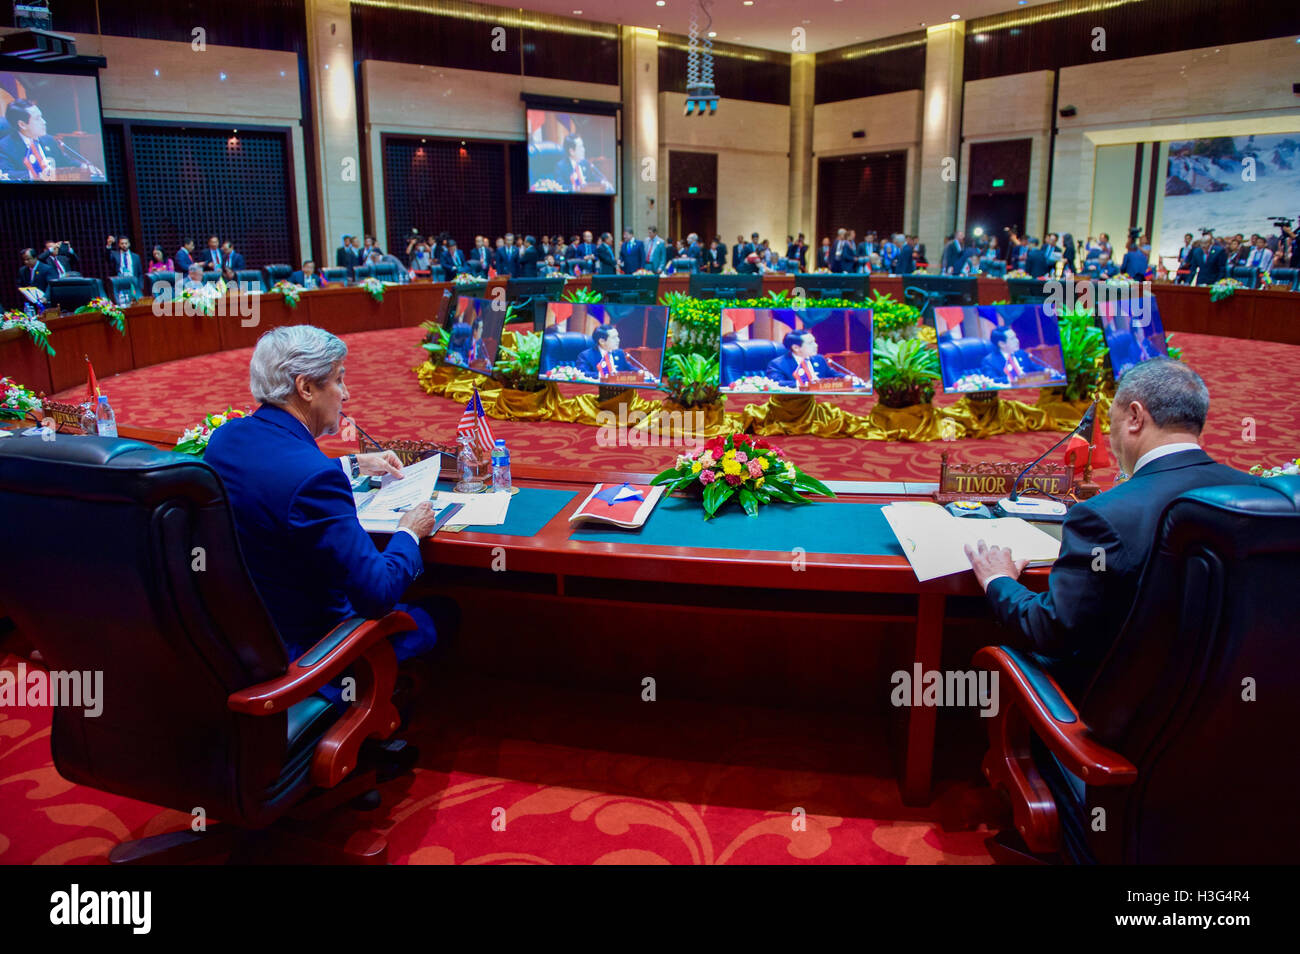 U.S. Secretary of State John Kerry sits with his fellow Foreign Ministers at the National Convention Center in Vientiane, Laos, on July 26, 2016, during a meeting of the ASEAN Regional Forum amid the annual meeting of the Association of Southeast Asian Nations (ASEAN). Stock Photo